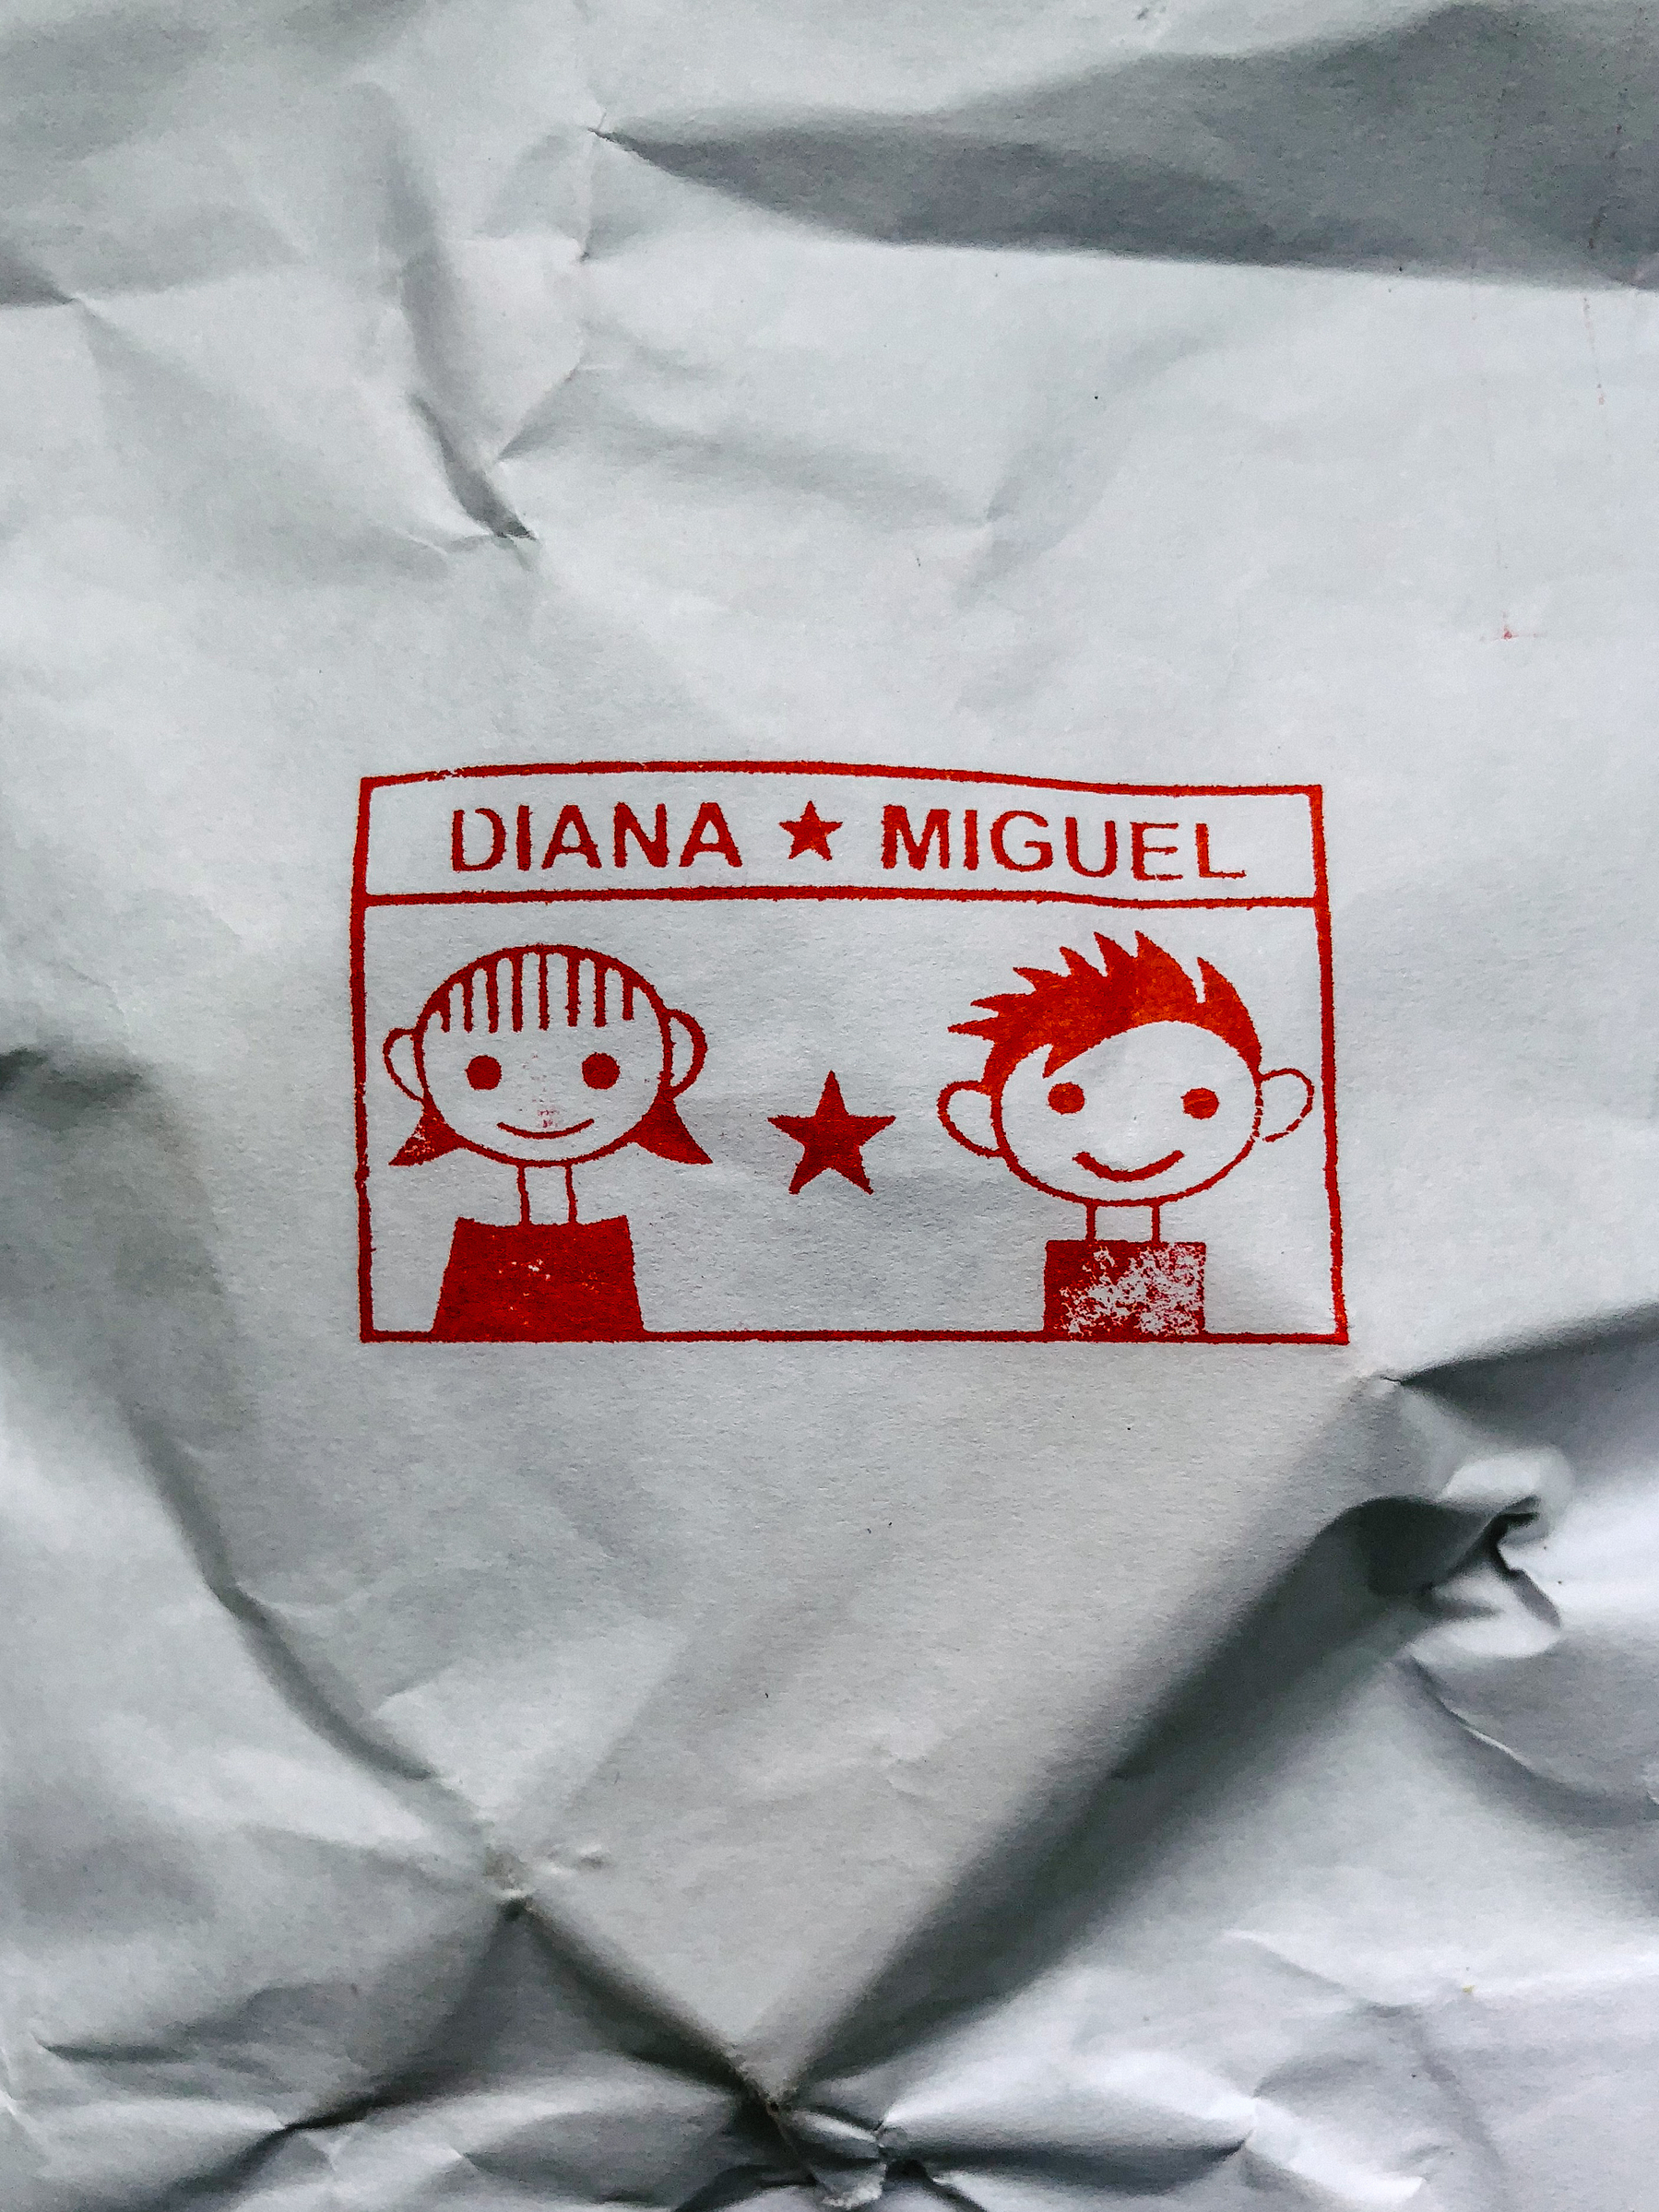 Stamped in a piece of paper, a drawing of a girl and a boy, with a star in the middle.  Above them “Diana star Miguel”